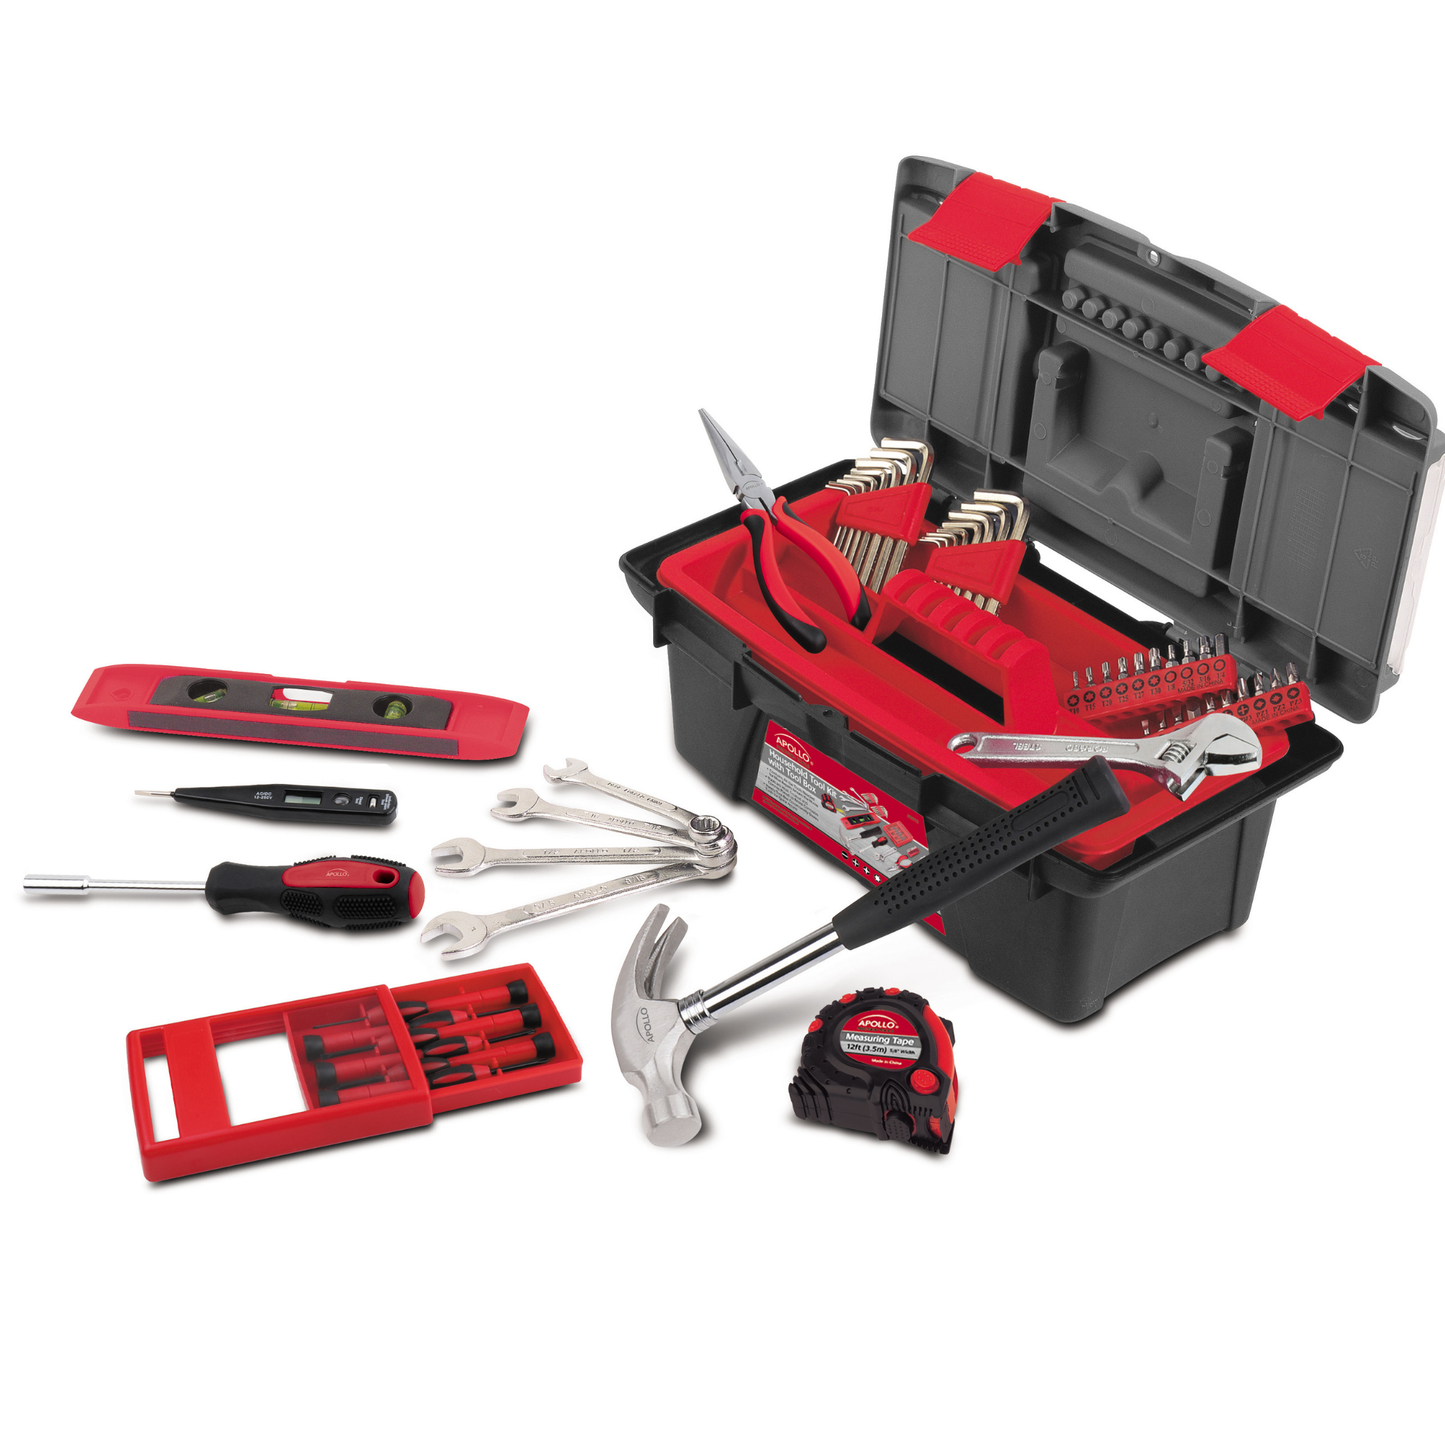 53 Piece Household Tool Kit with Tool Box - DT9773